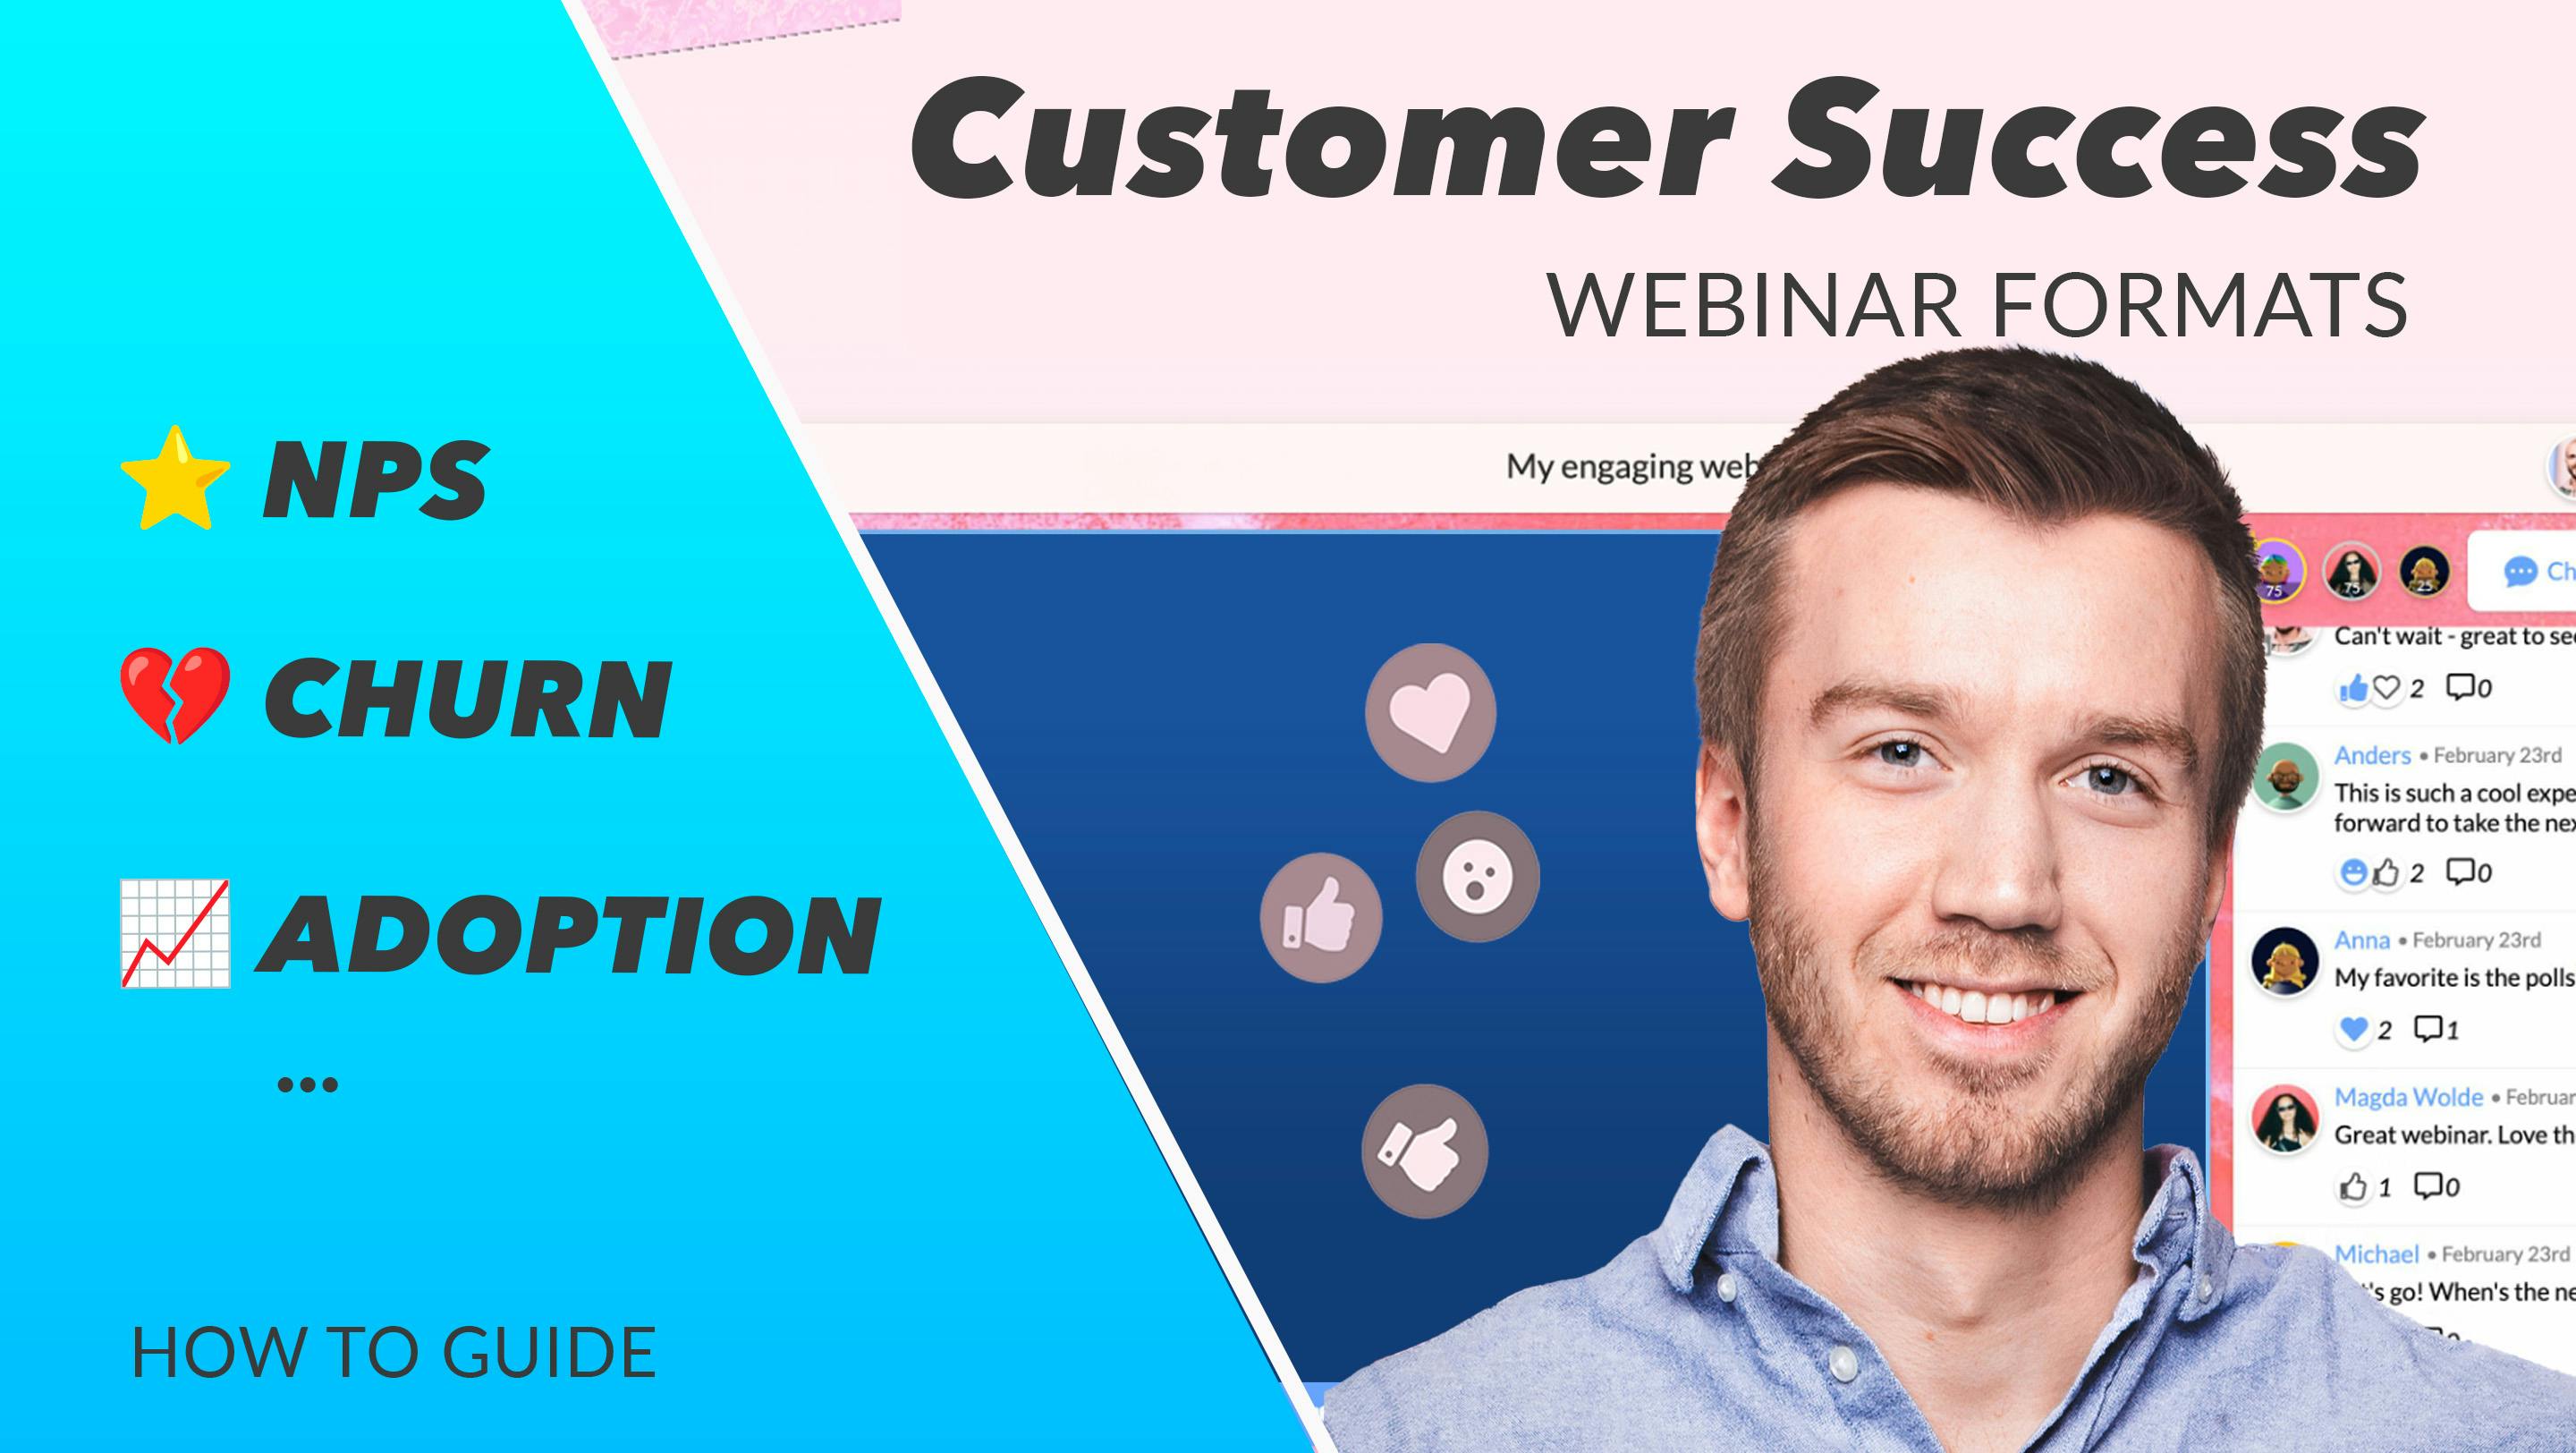 Why create and how to host webinars as Customer Success? Here are the best tips on how to build relationships with existing and potential customers using webinars.